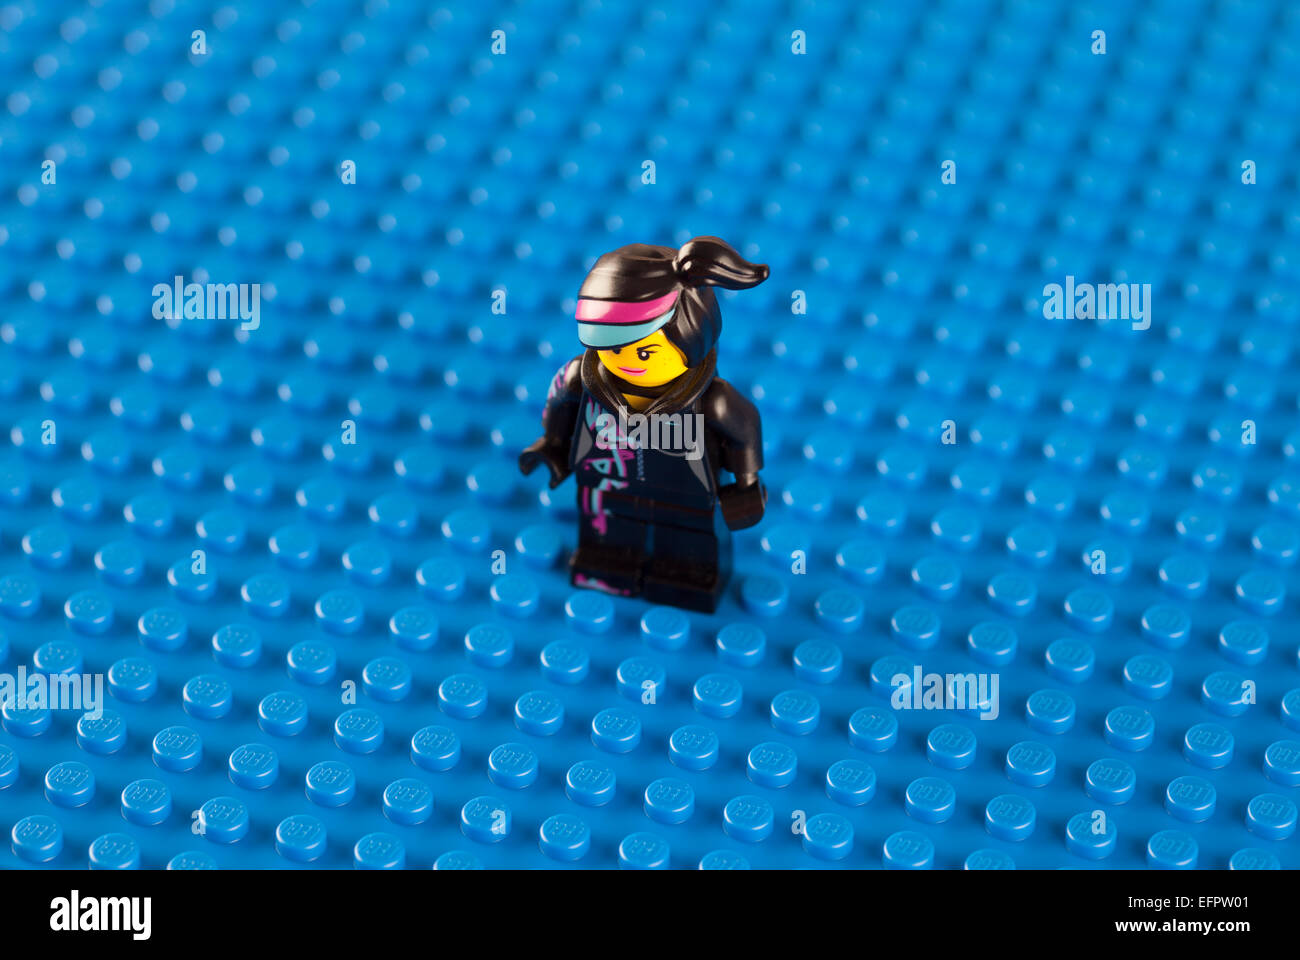 Lego Series High Resolution Stock Photography and Images - Alamy